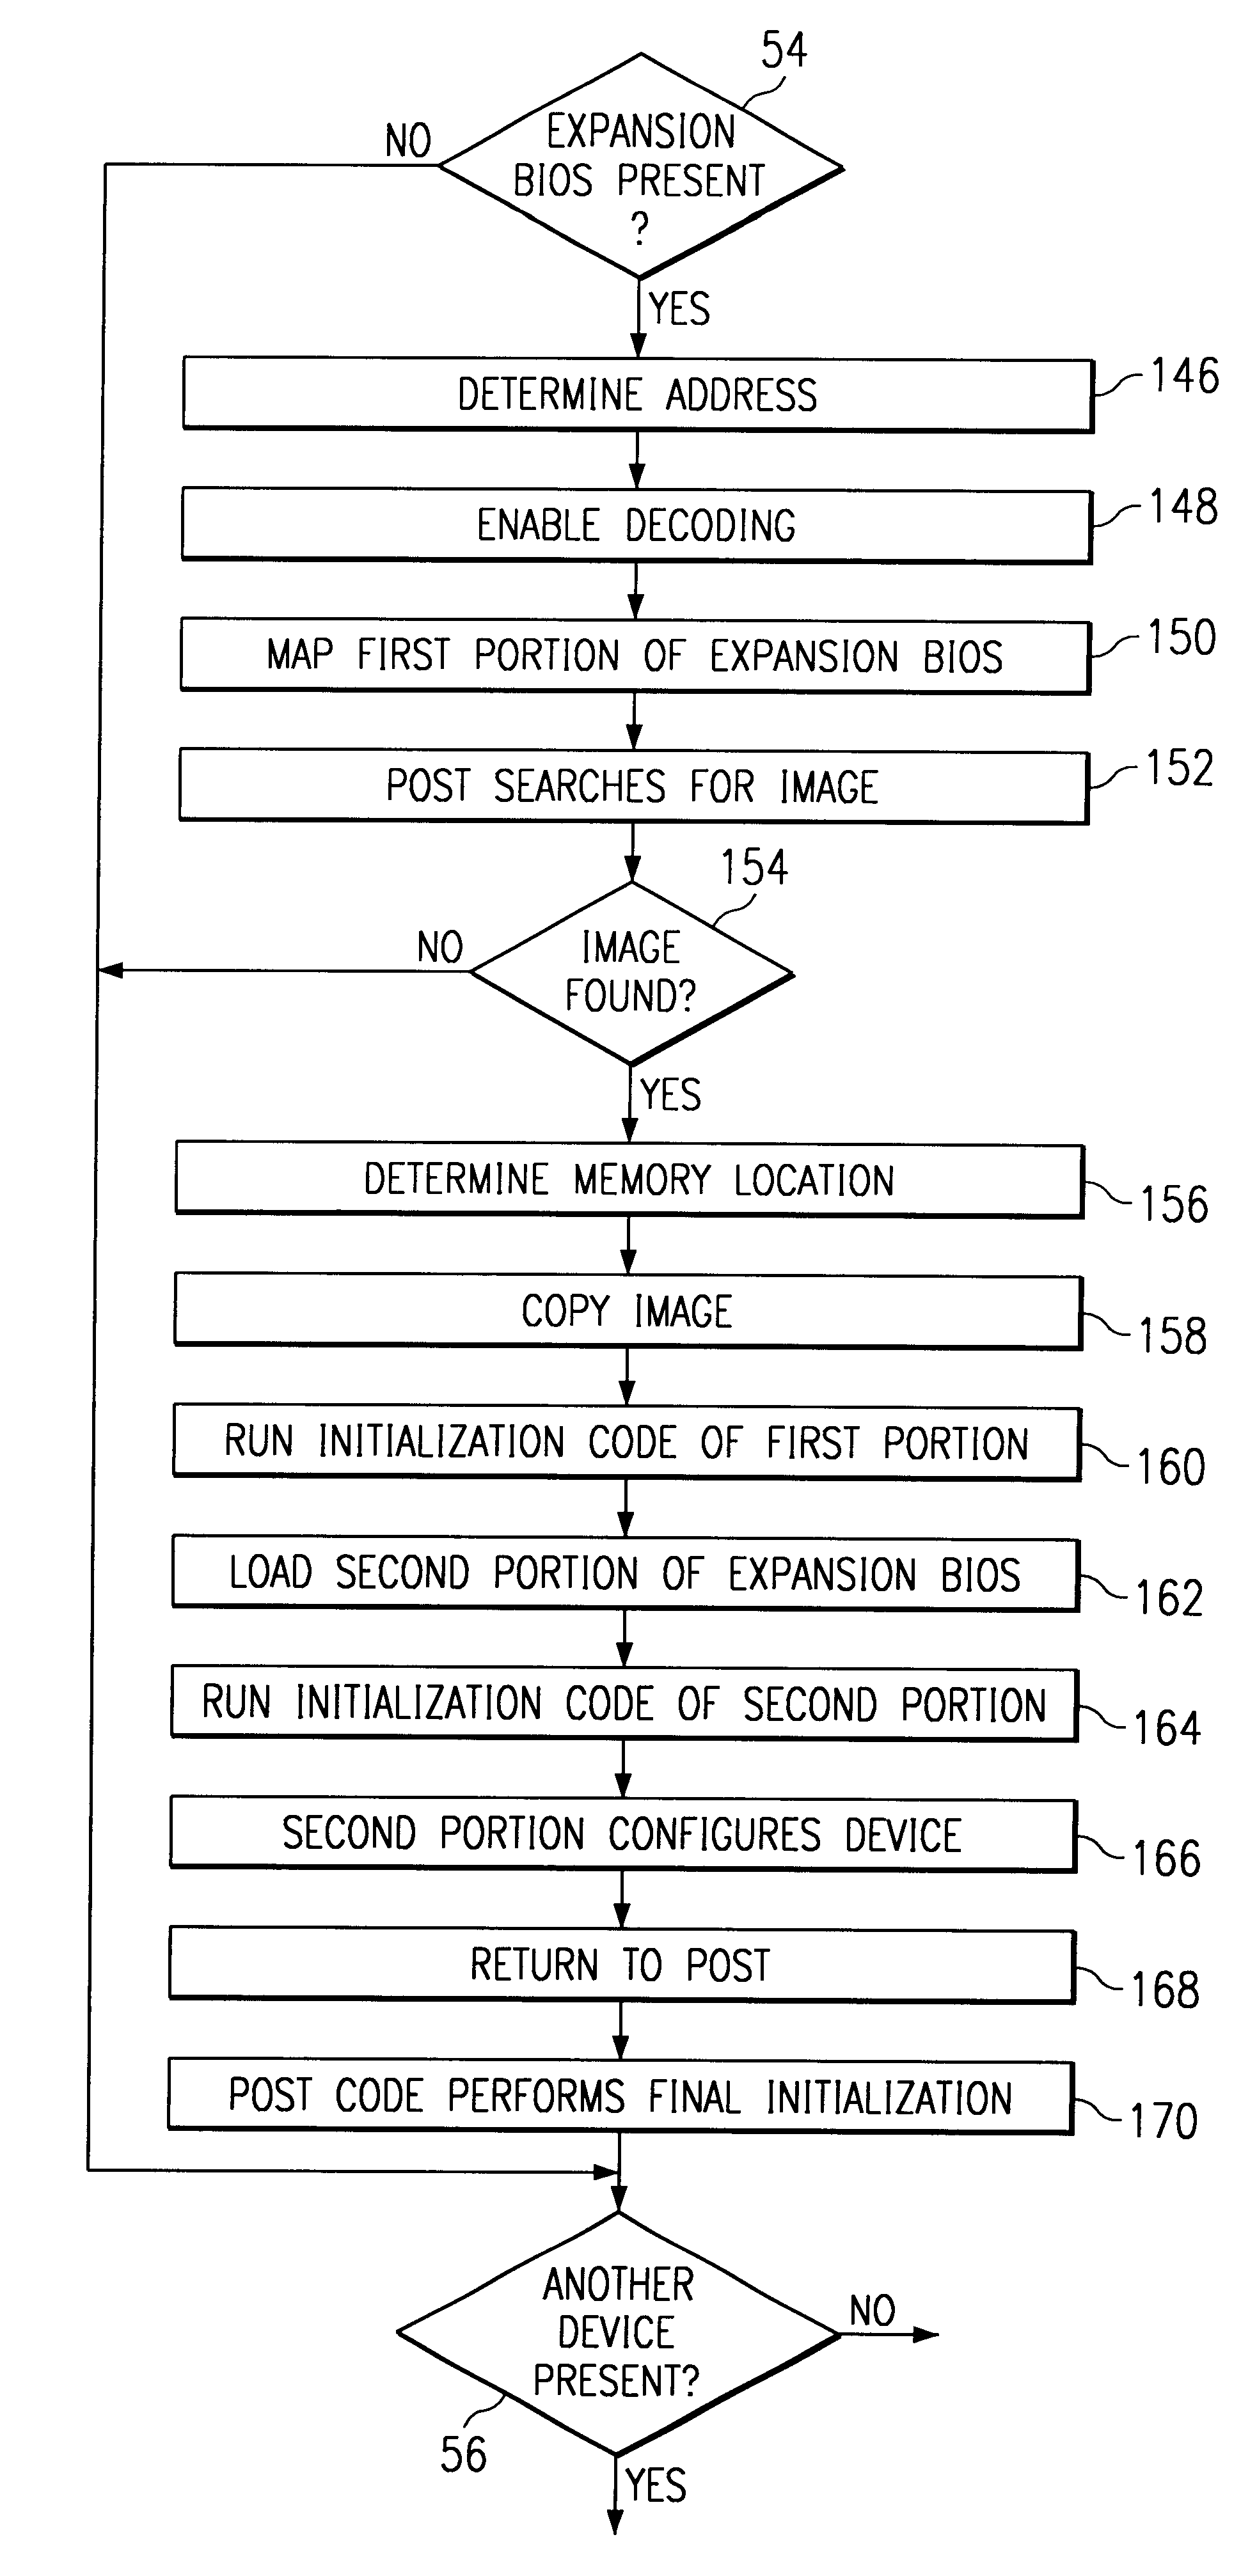 Storing system-level mass storage configuration data in non-volatile memory on each mass storage device to allow for reboot/power-on reconfiguration of all installed mass storage devices to the same configuration as last use